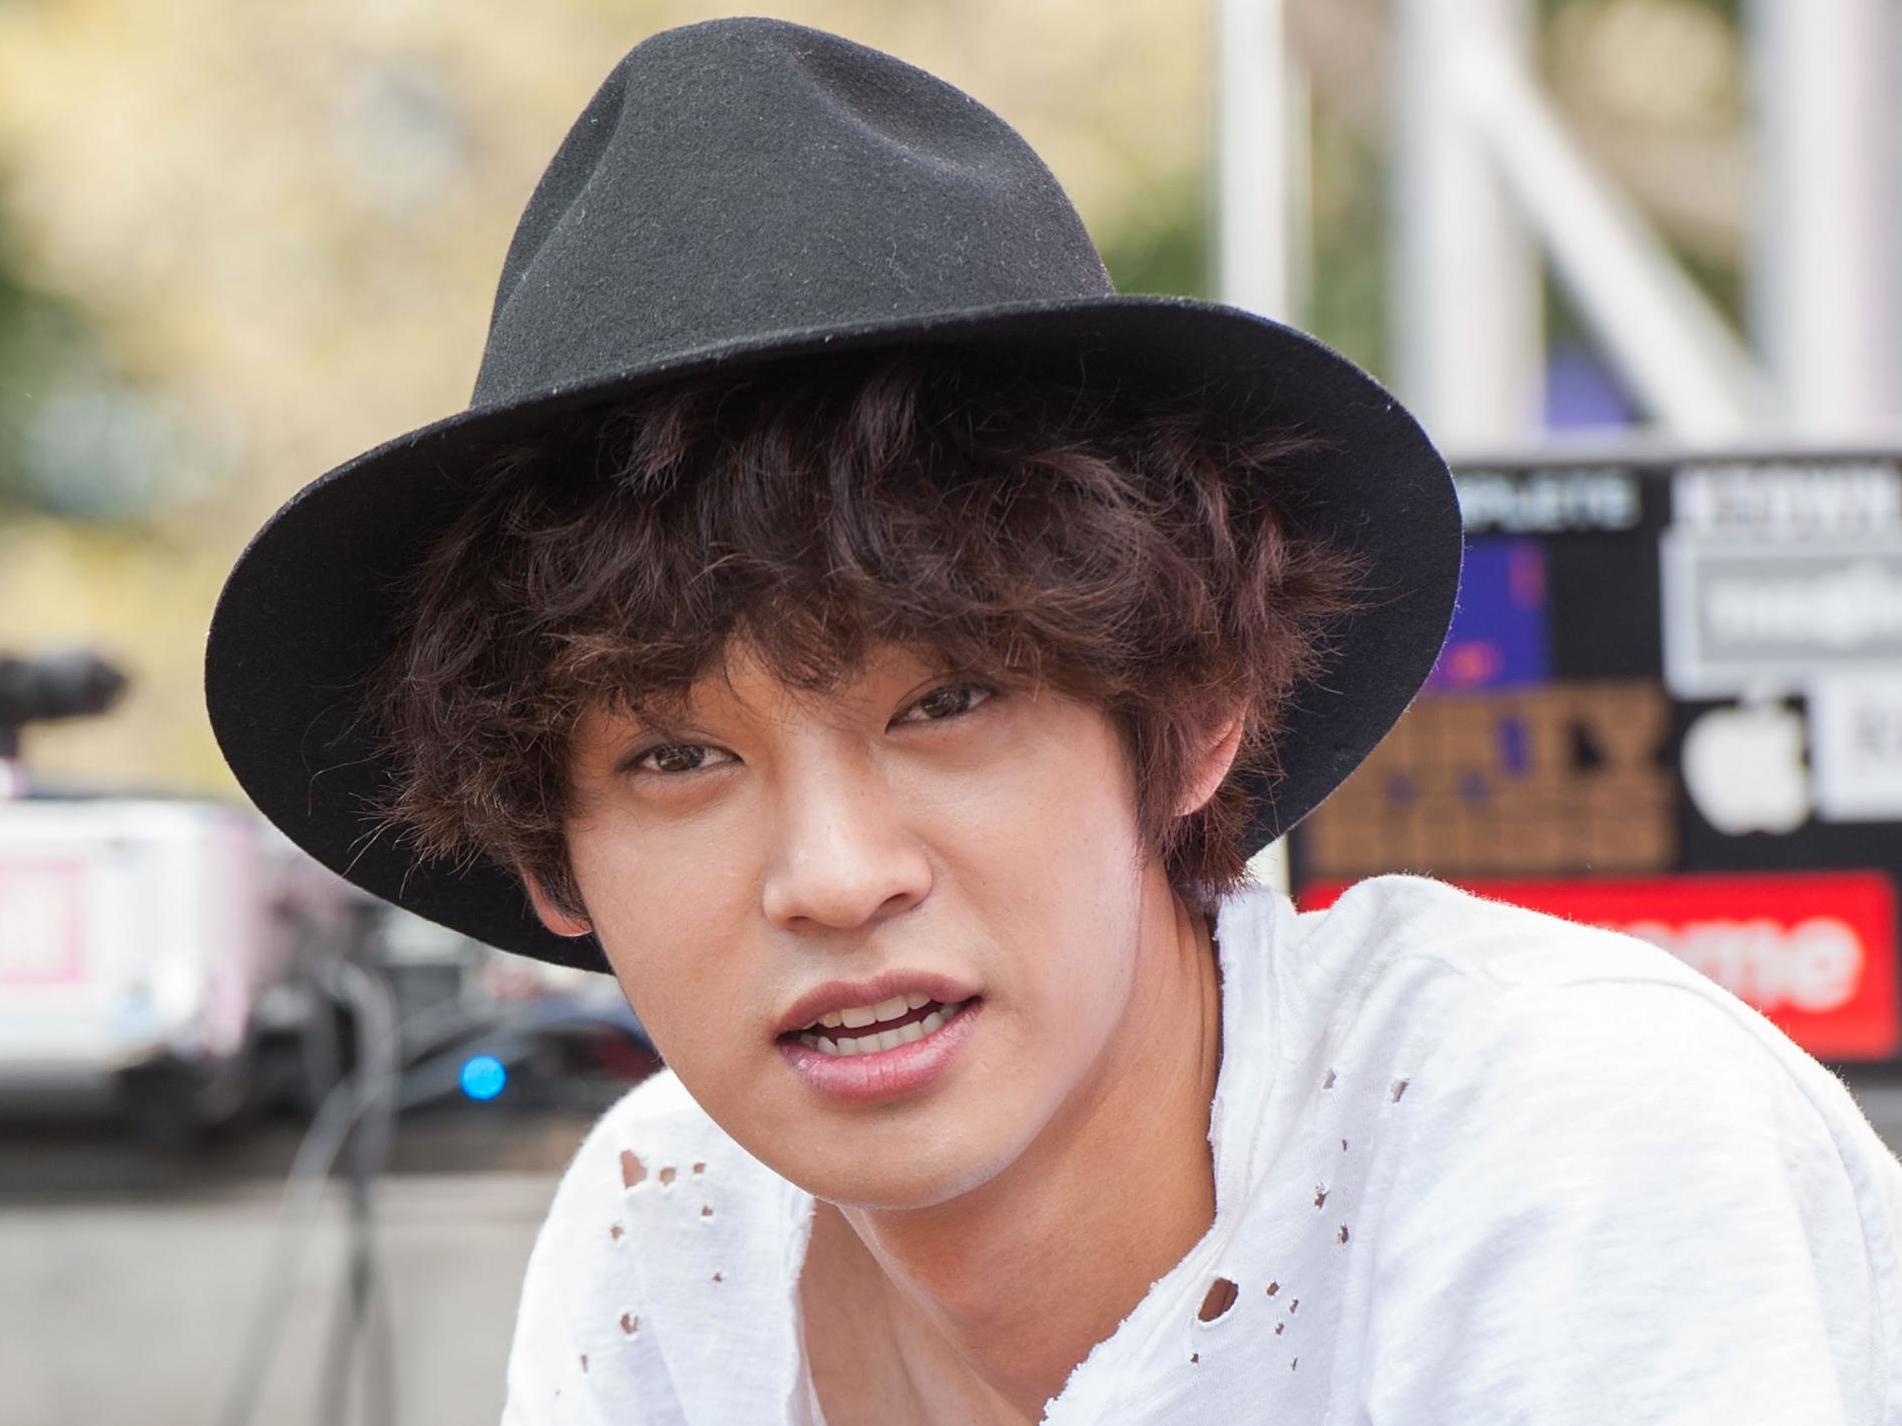 Jung Joon-young scandal: K-pop star quits music industry after filming  secret sex videos | The Independent | The Independent